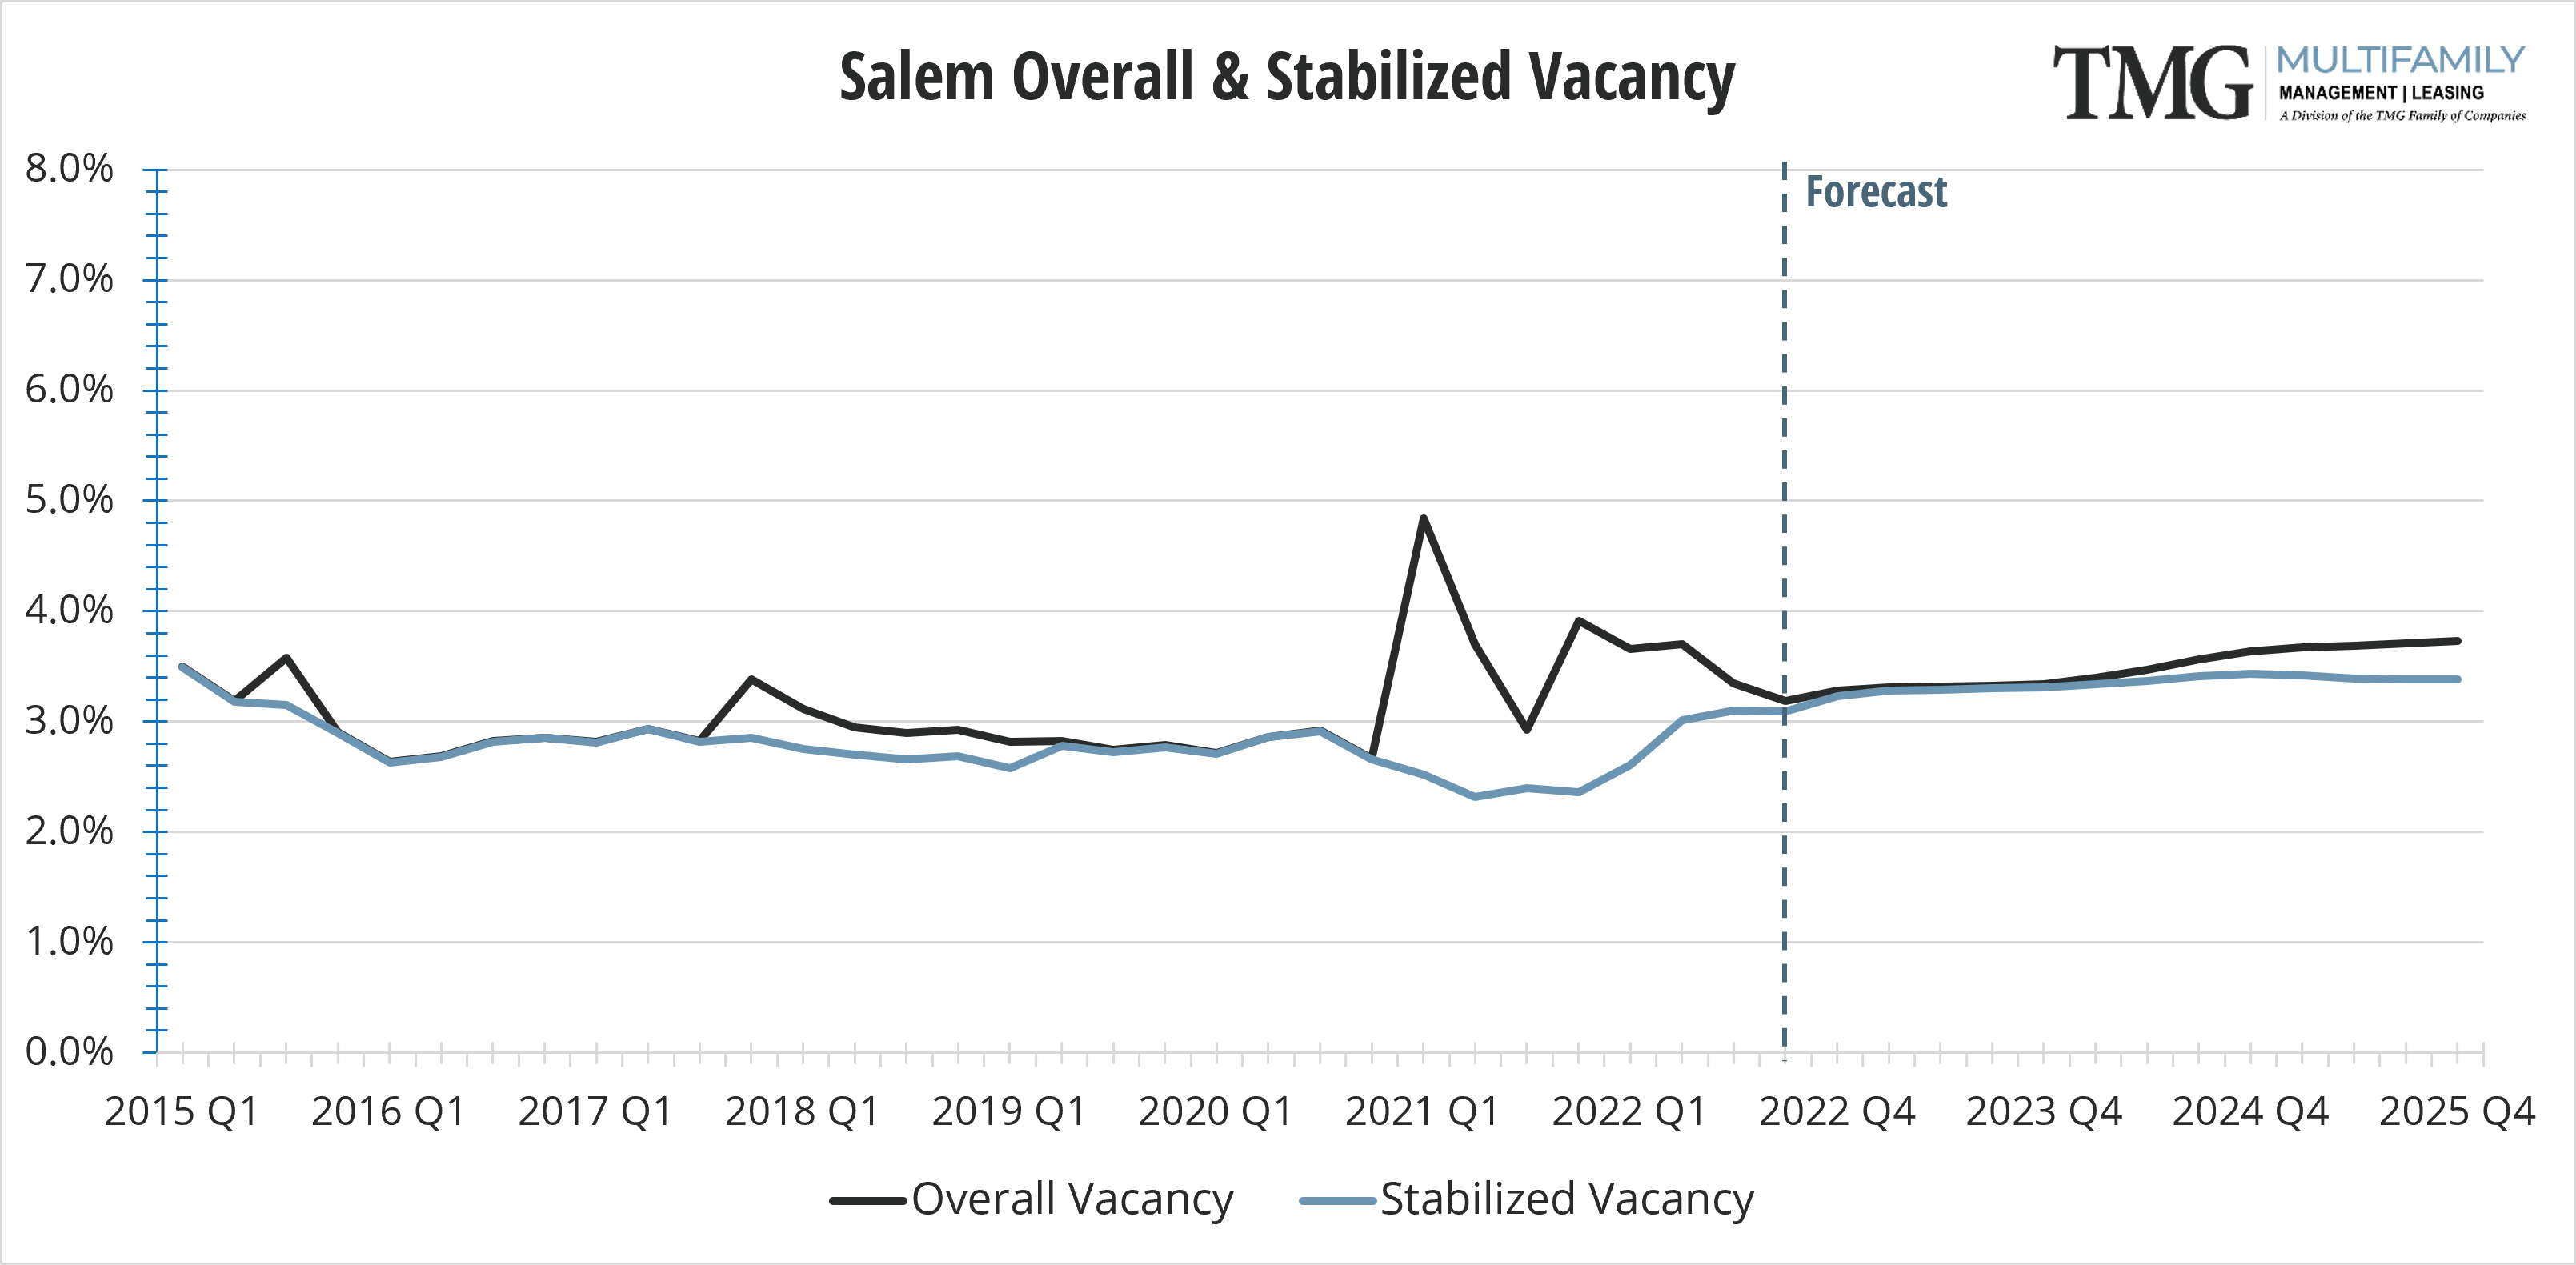 Salem Overall & Stabilized Vacancy